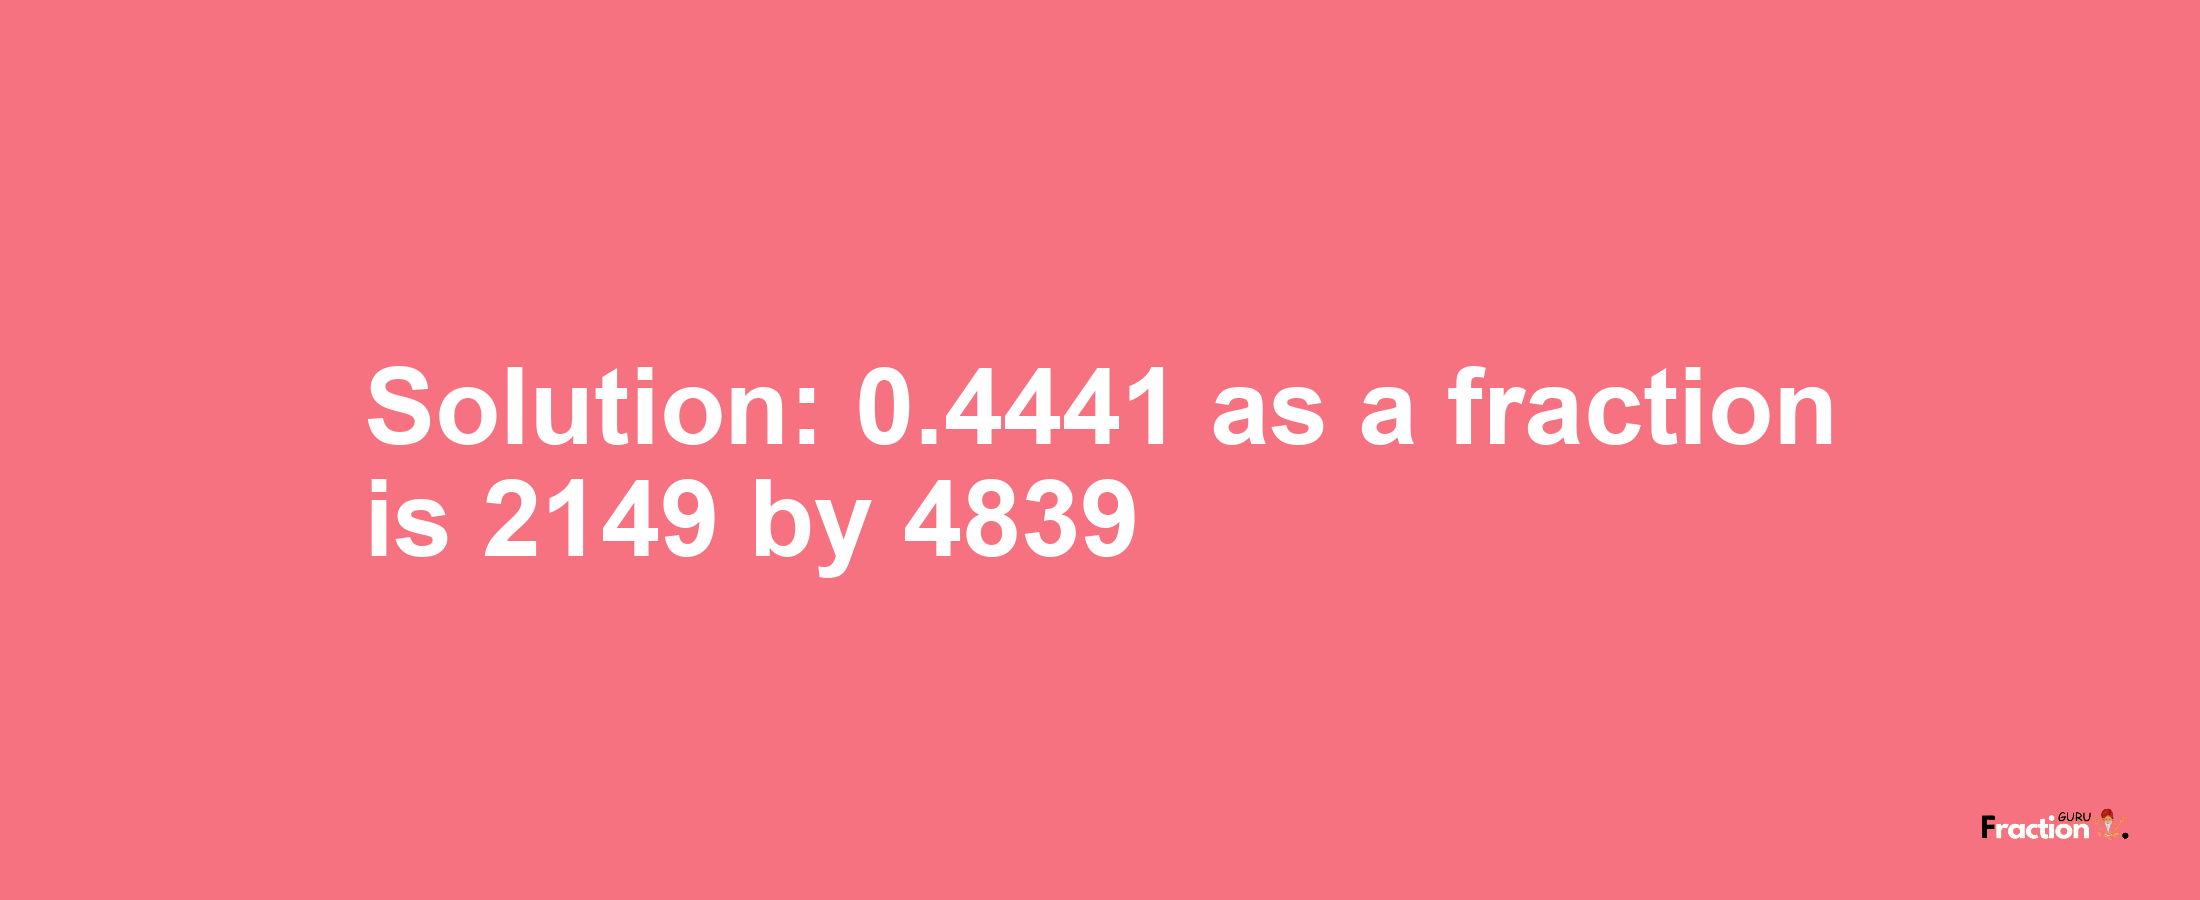 Solution:0.4441 as a fraction is 2149/4839